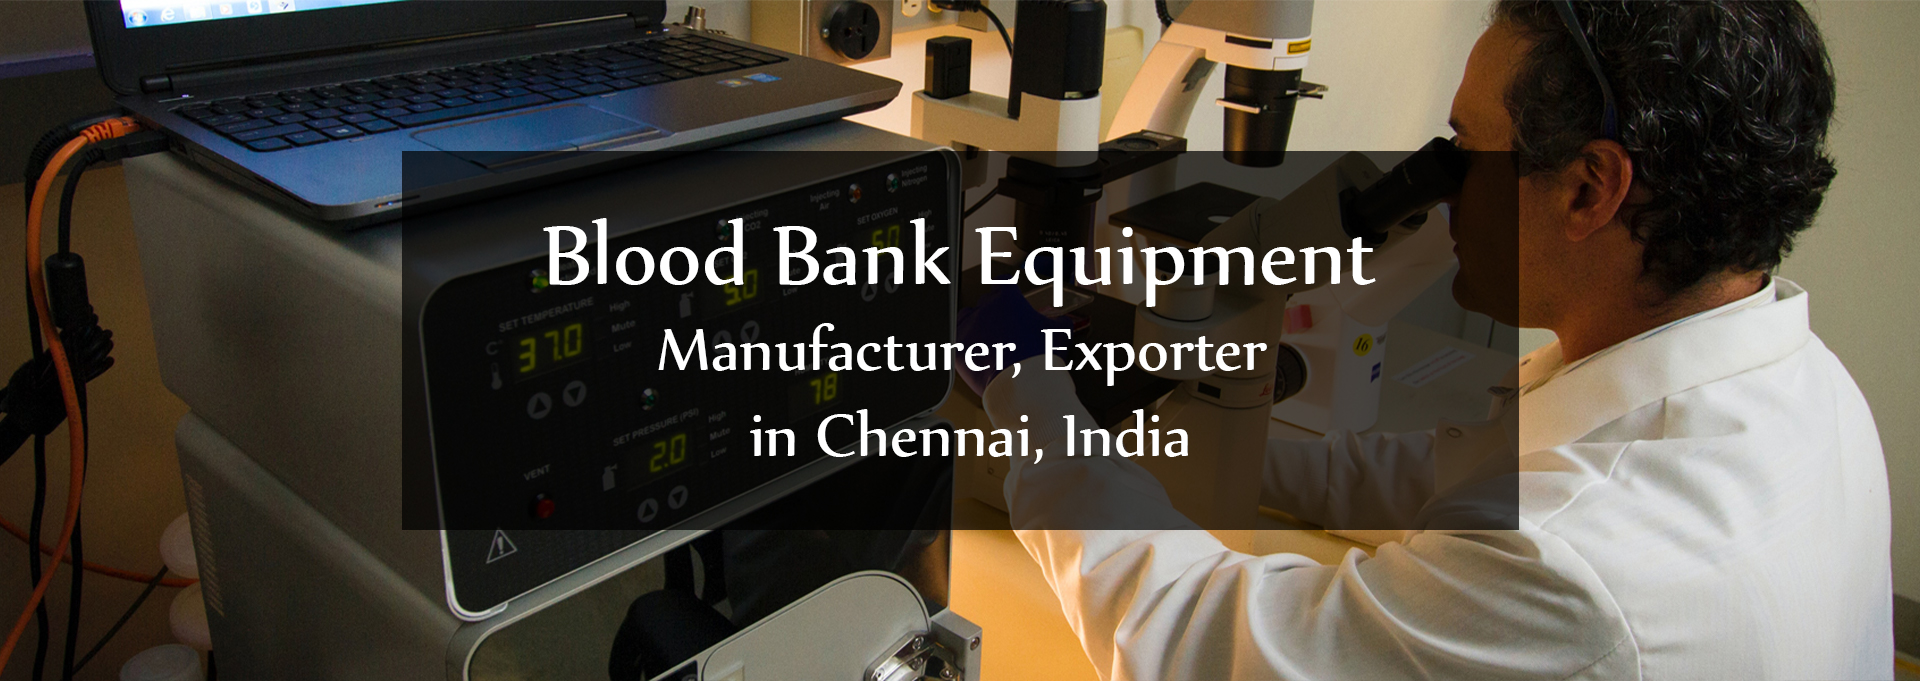 Blood Bank Equipment Manufacturer, Exporter in Chennai, India